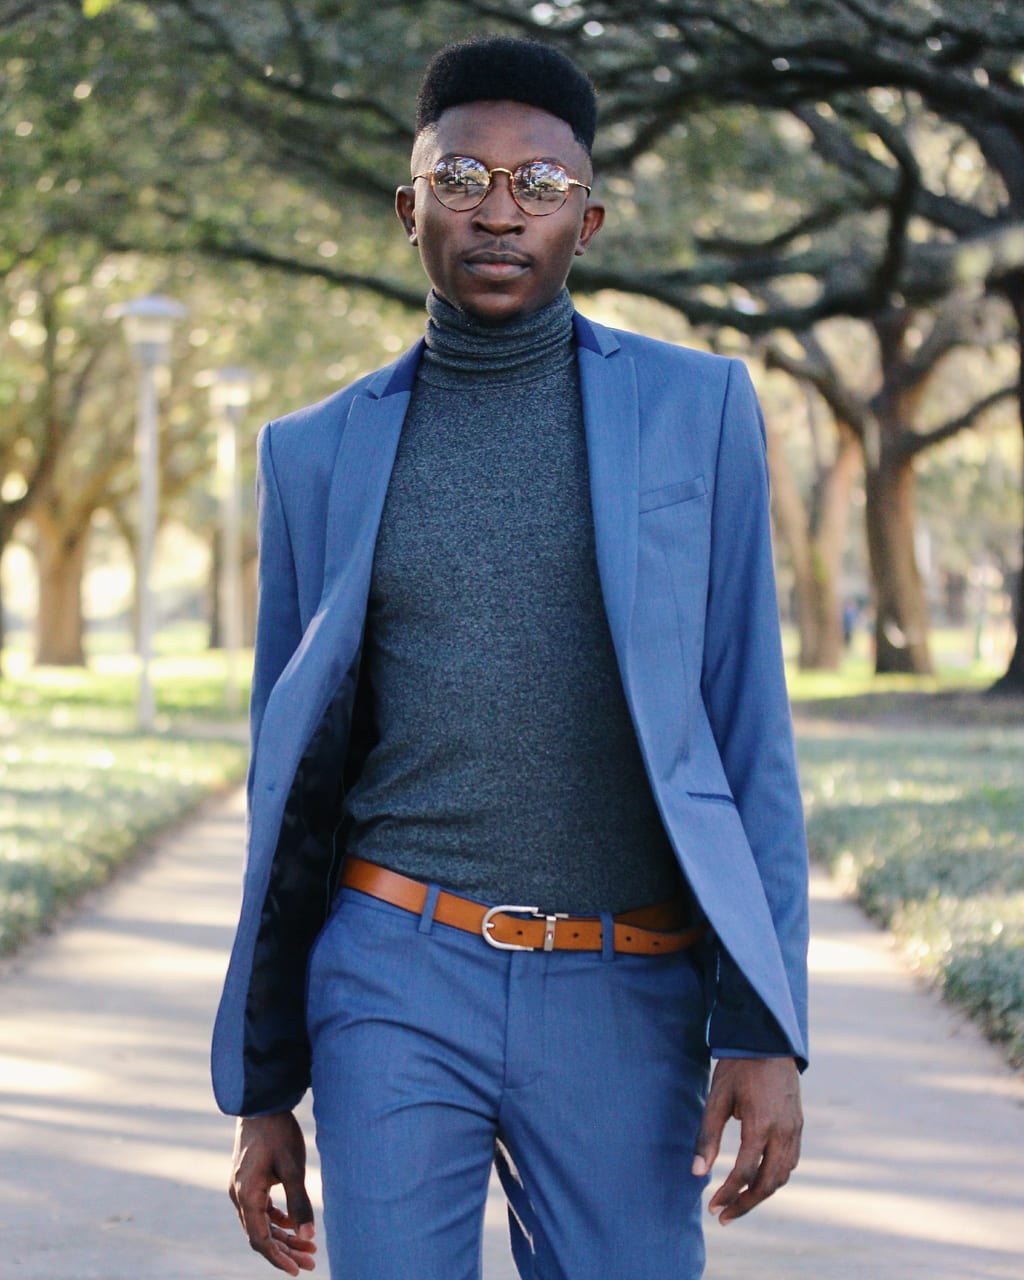 Mens College Fashion at USF: The Perfect Outfit